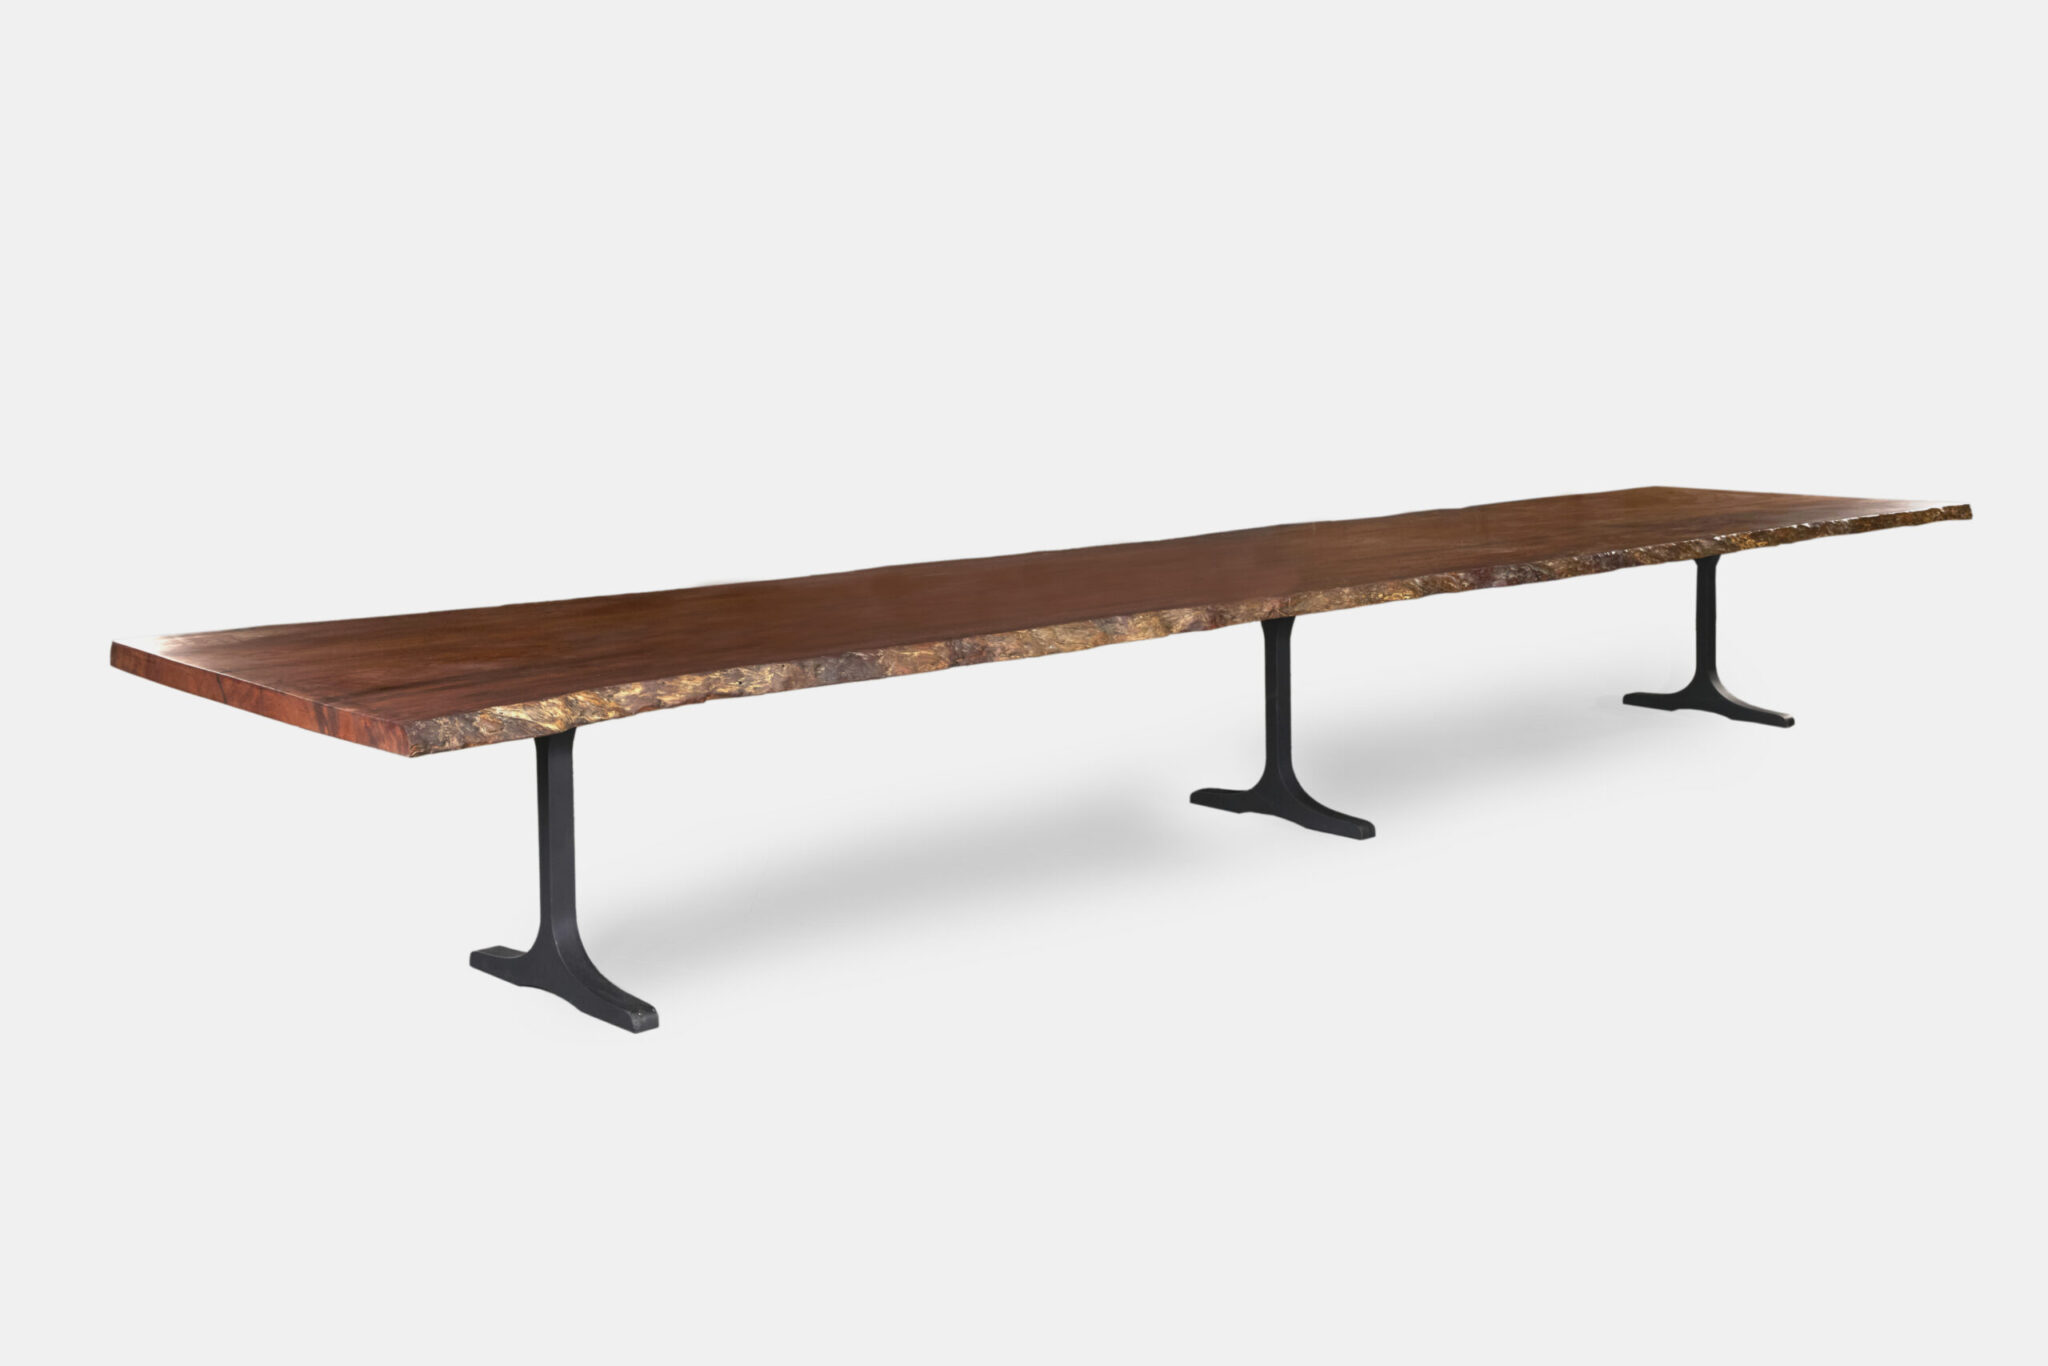 Bellevue Hill Dining Table made of Jarrah timber showcasing its natural beauty and craftsmanship